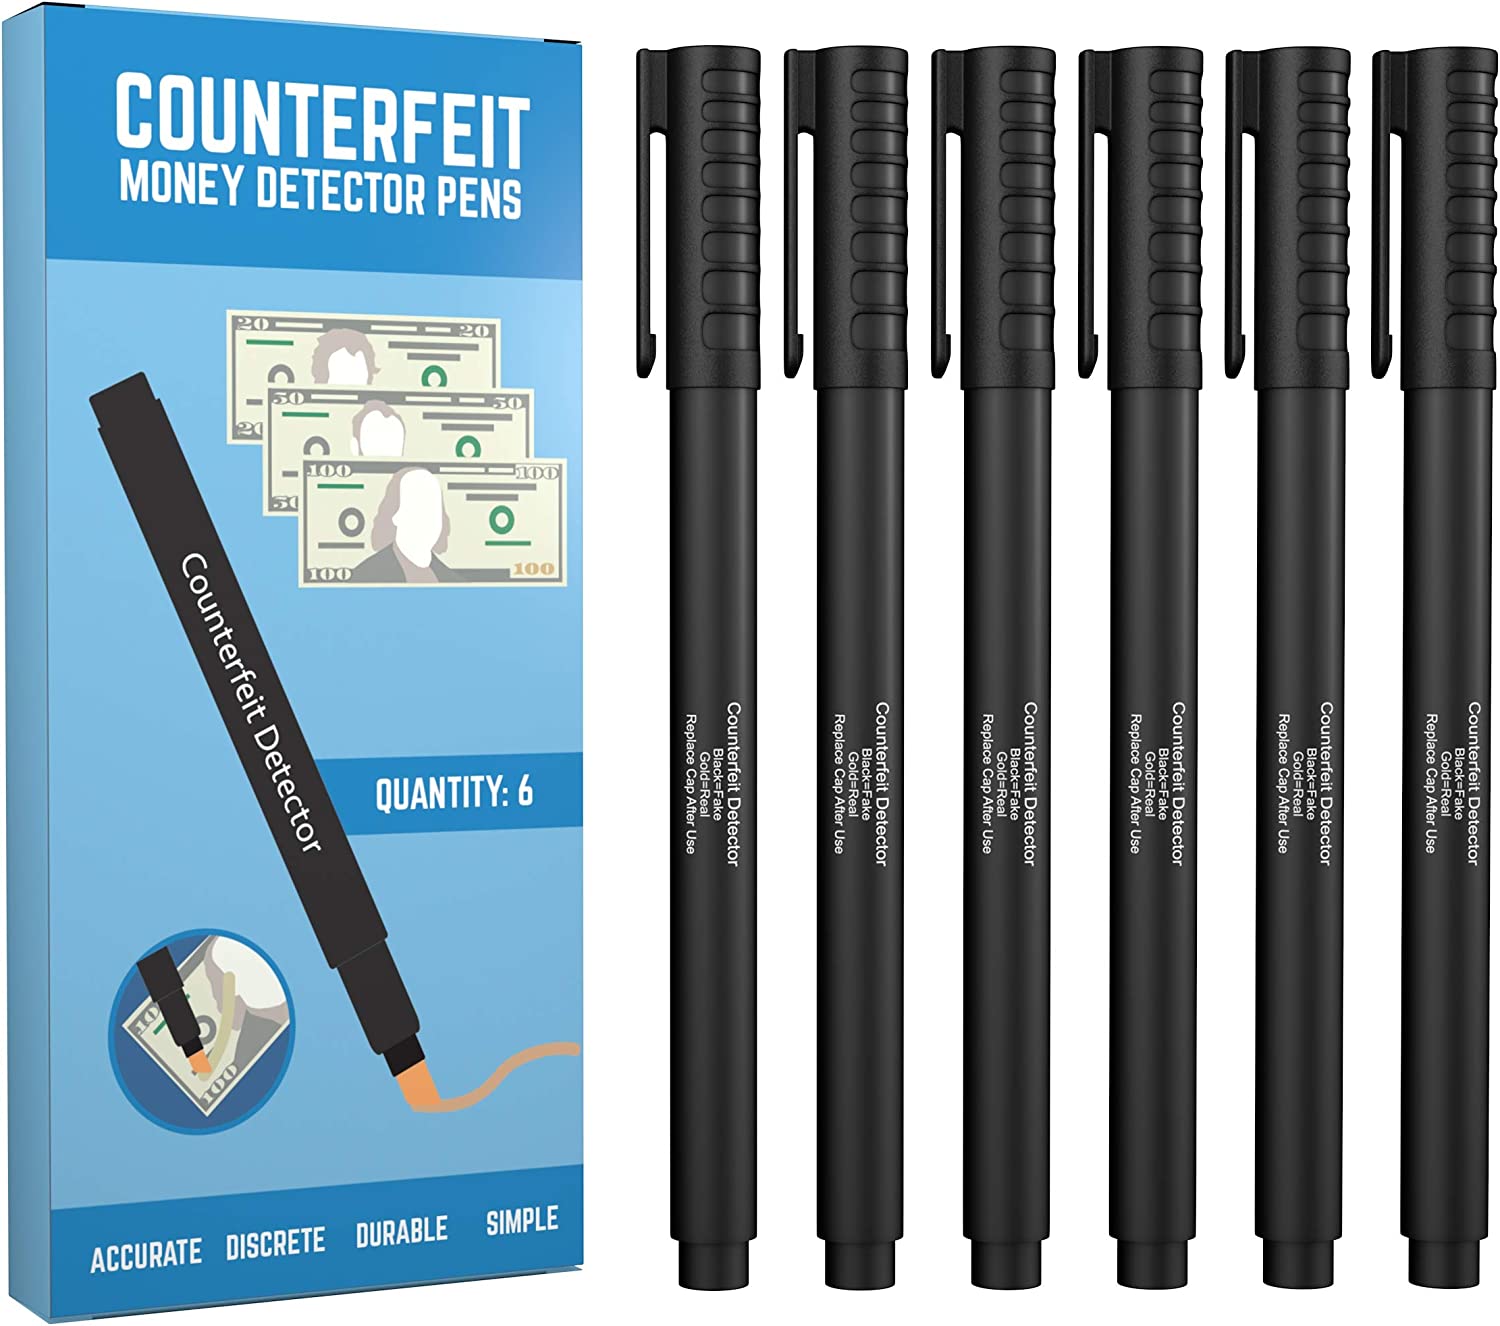 Counterfeit Pens - Money Detector Markers - Detects Fake Counterfeit Bills (6 Pens) with Easy Carry Pocket Clip